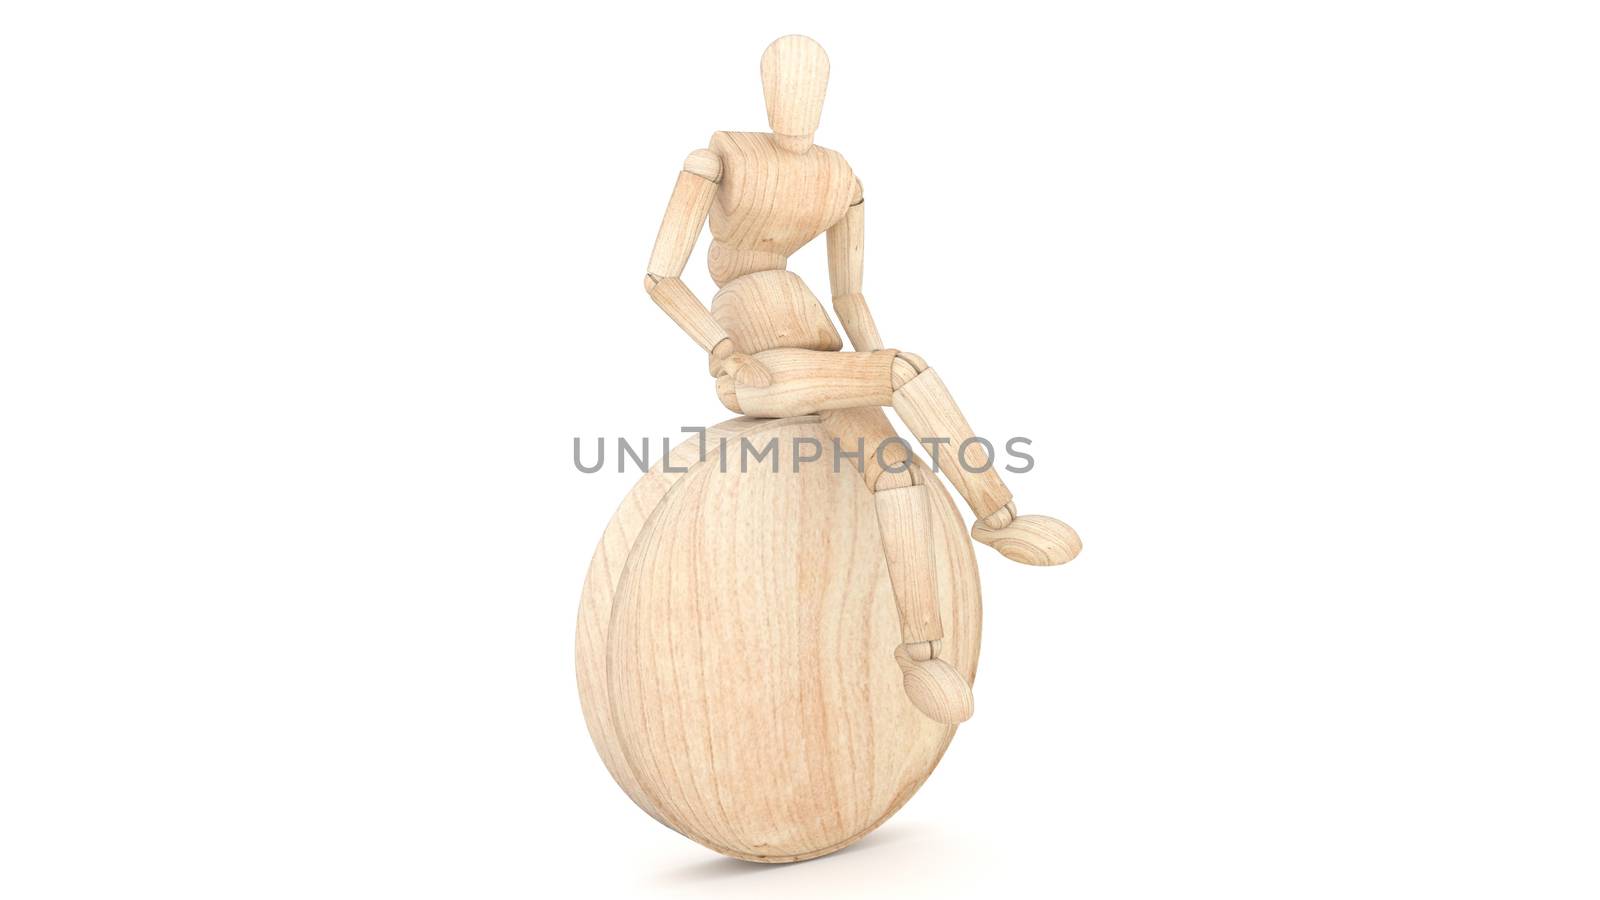 Wooden Dummy Sit. 3D rendering by Minny0012011@hotmail.com